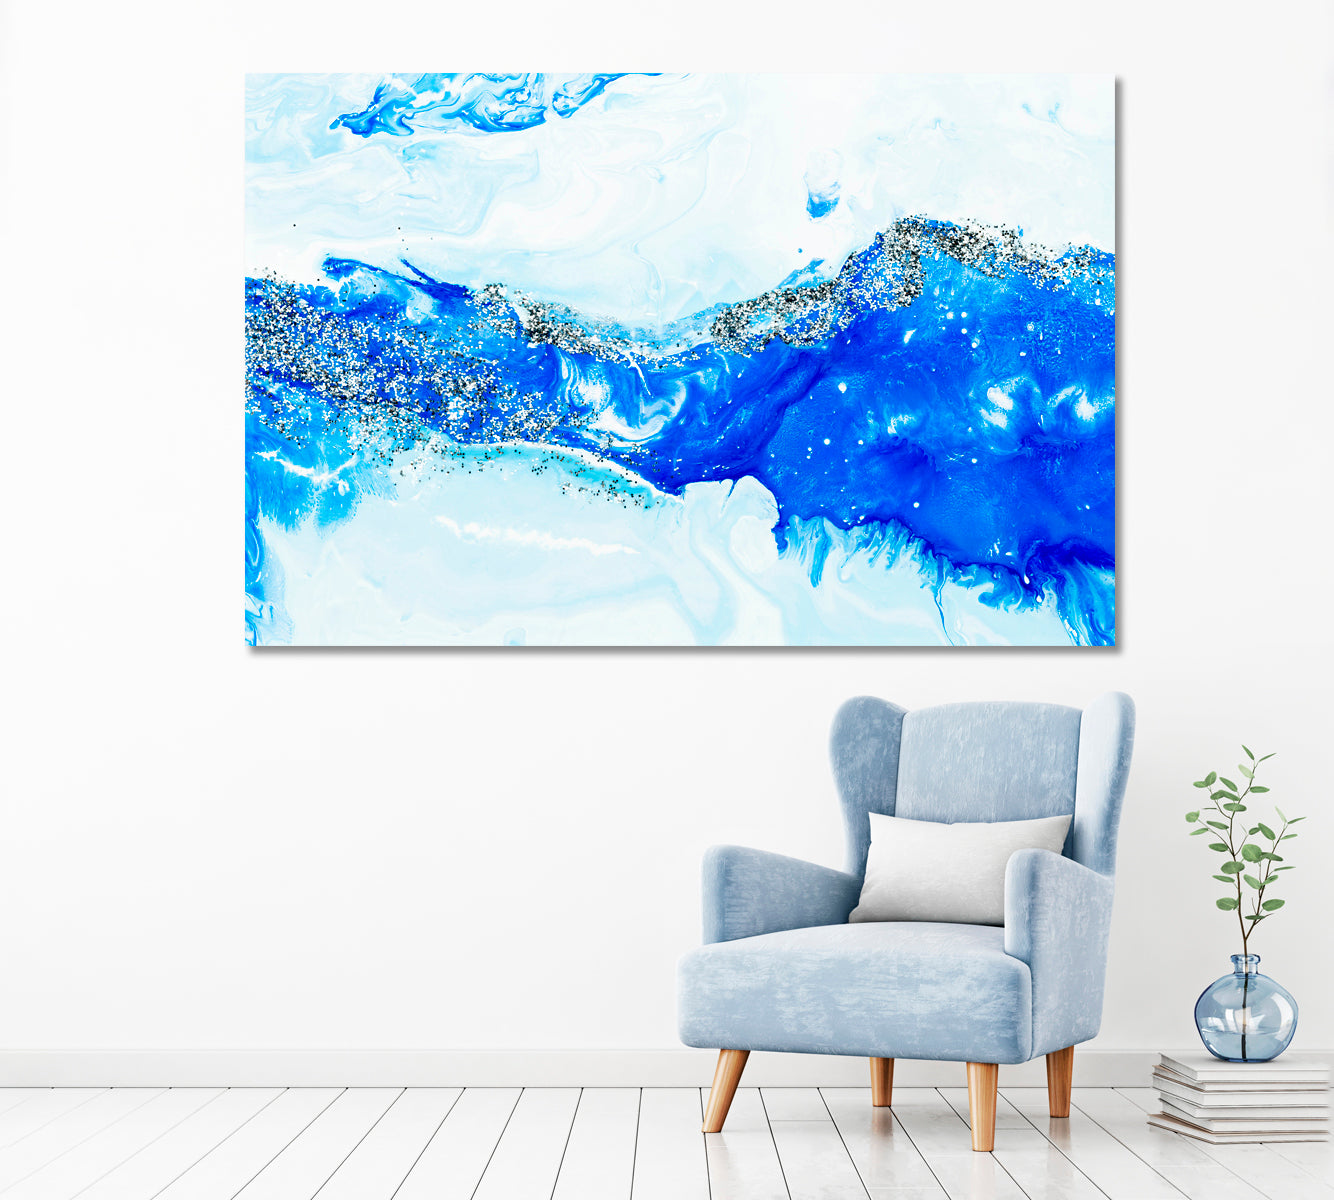 Abstract Blue Ocean with Silver Glitter Canvas Print ArtLexy 1 Panel 24"x16" inches 